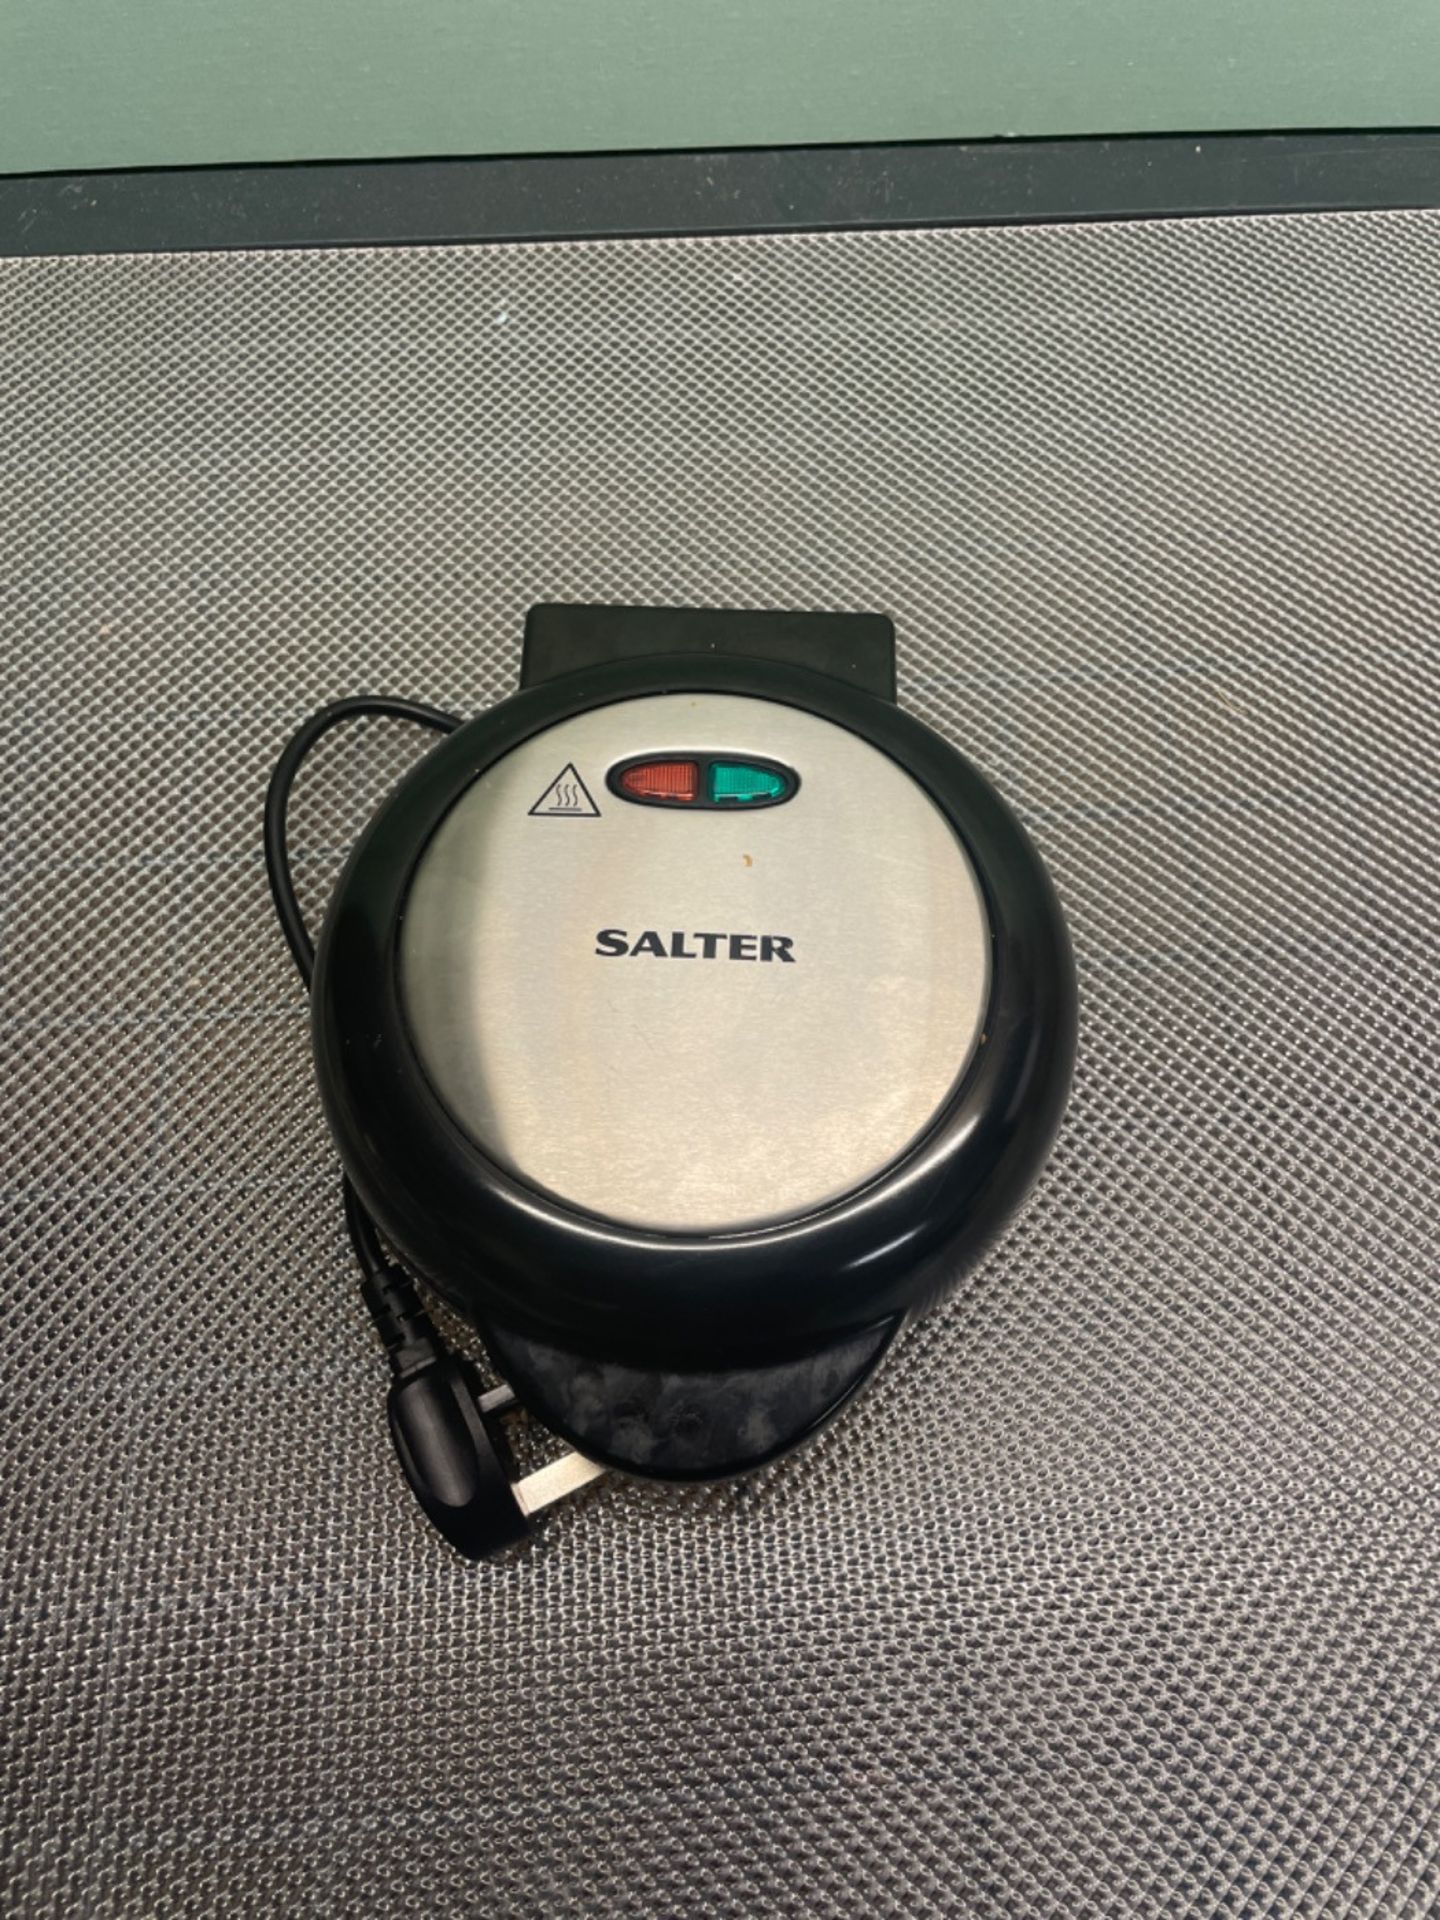 Salter EK2716 Dual Omelette Maker, Easy Clean Double Non-Stick Plates, 2-3 Minute Preheat, 750W, Co - Image 3 of 3